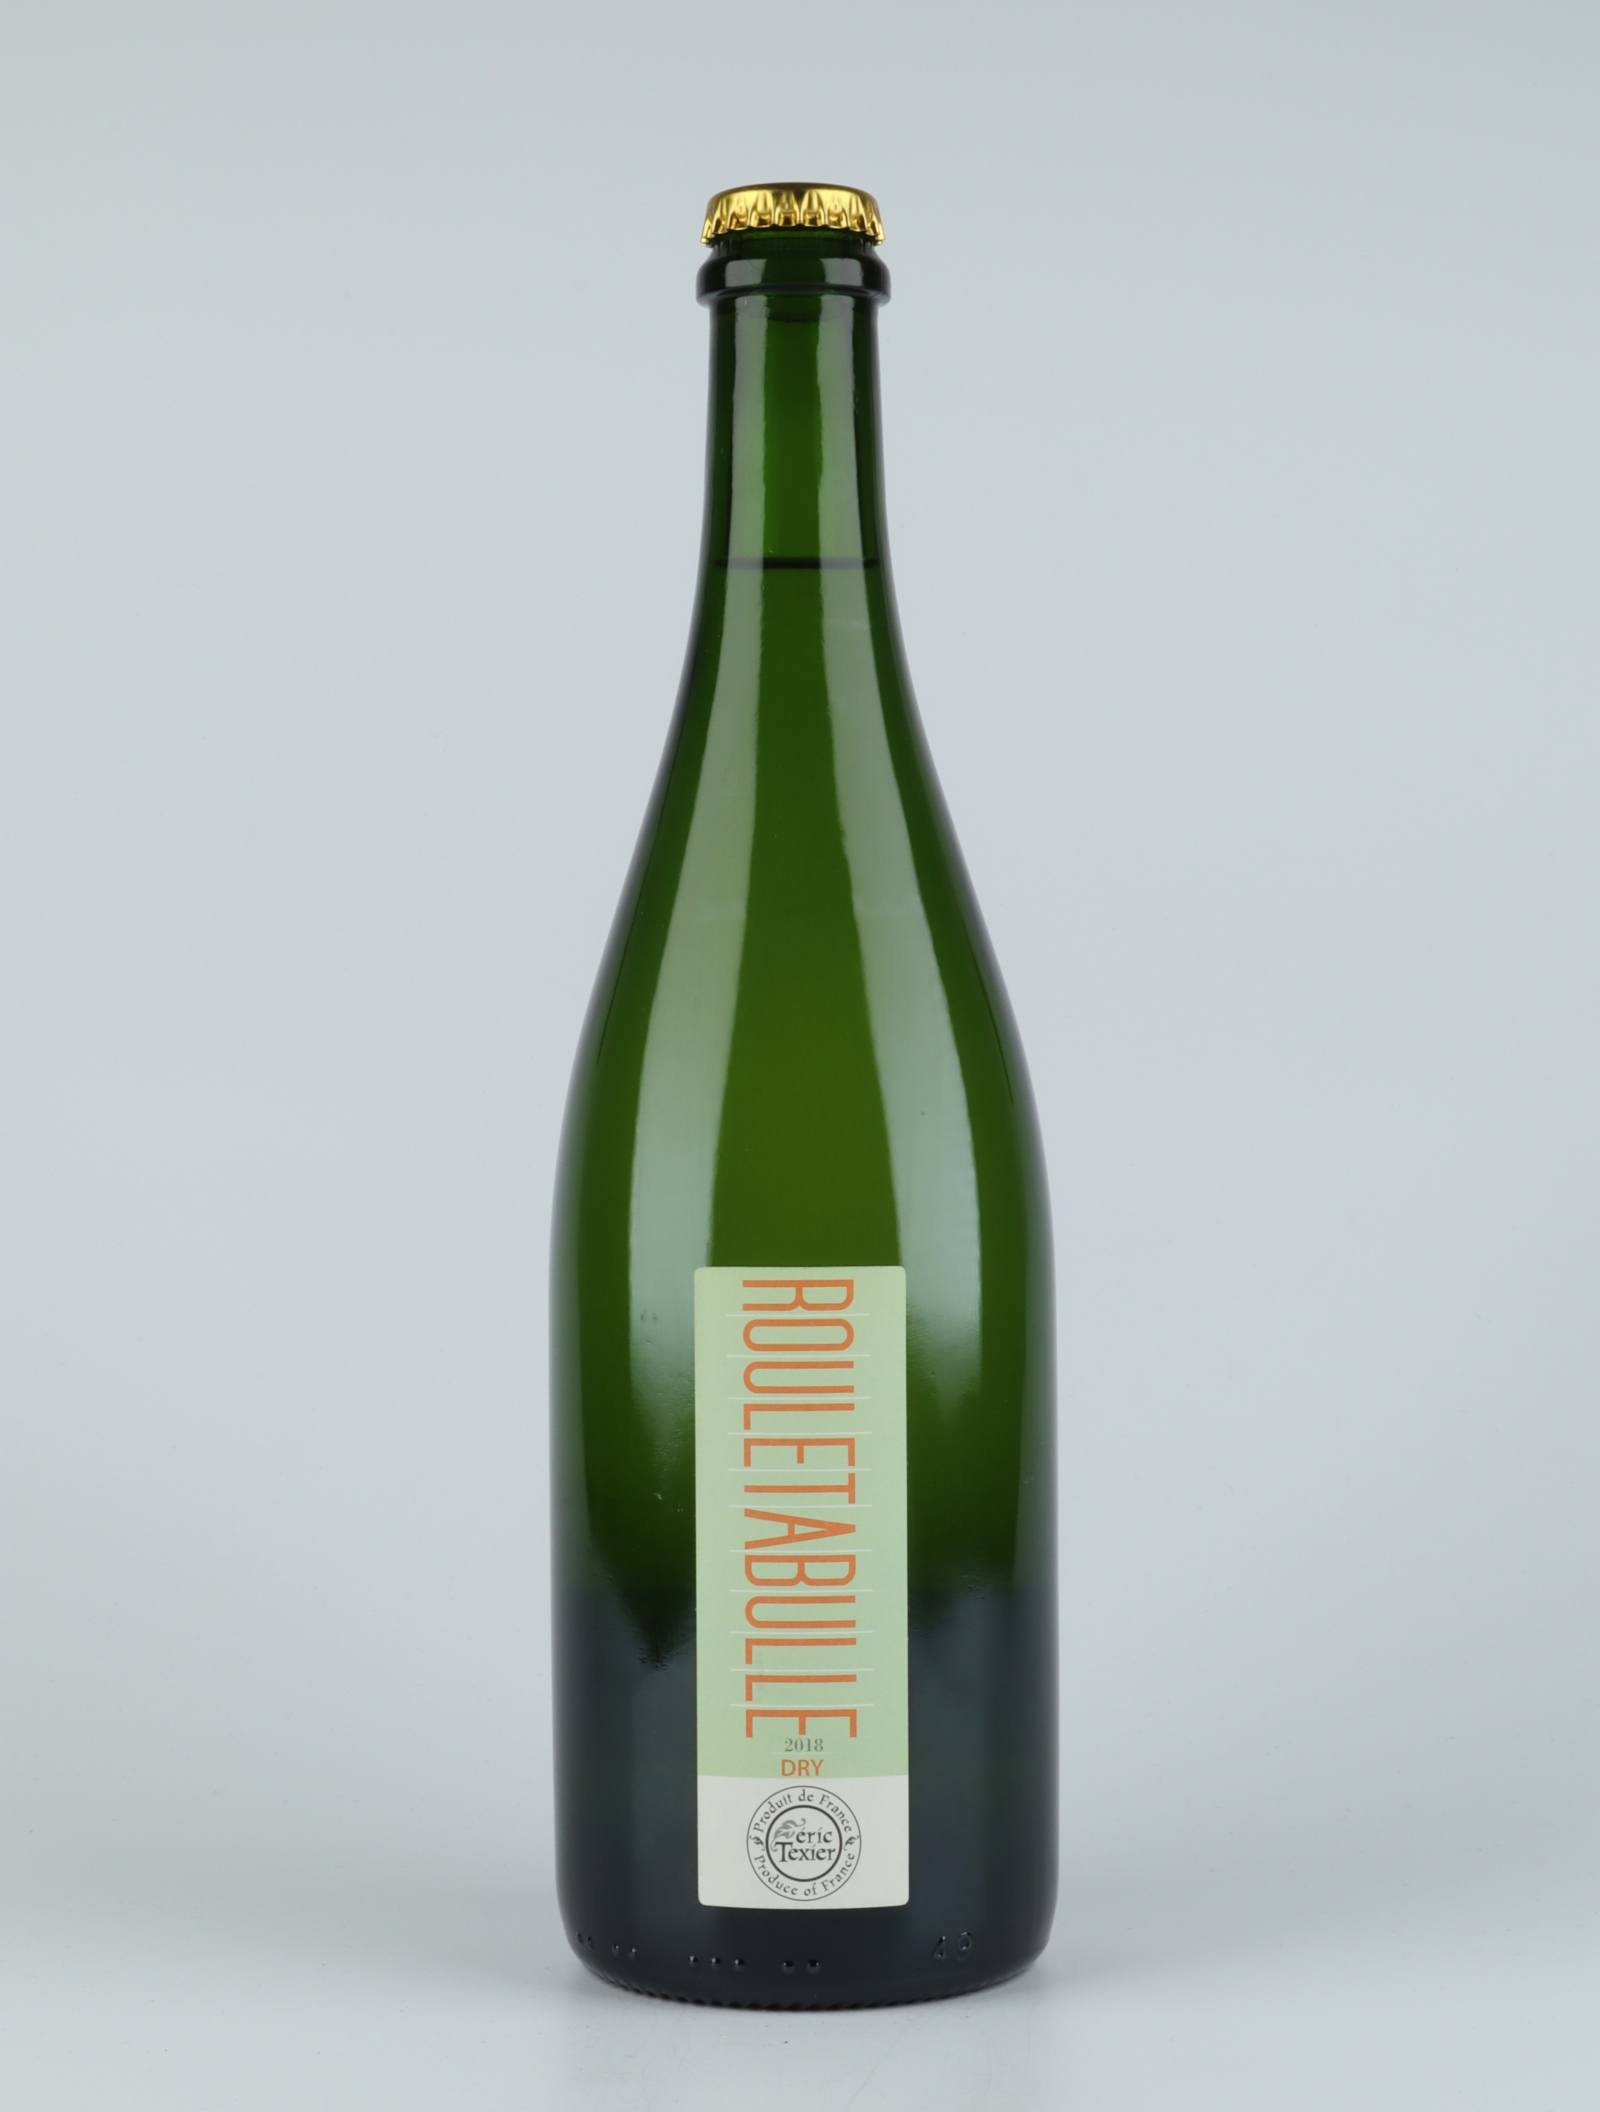 A bottle 2018 Rouletabulle - Pet'nat Sparkling from Eric Texier, Rhône in France